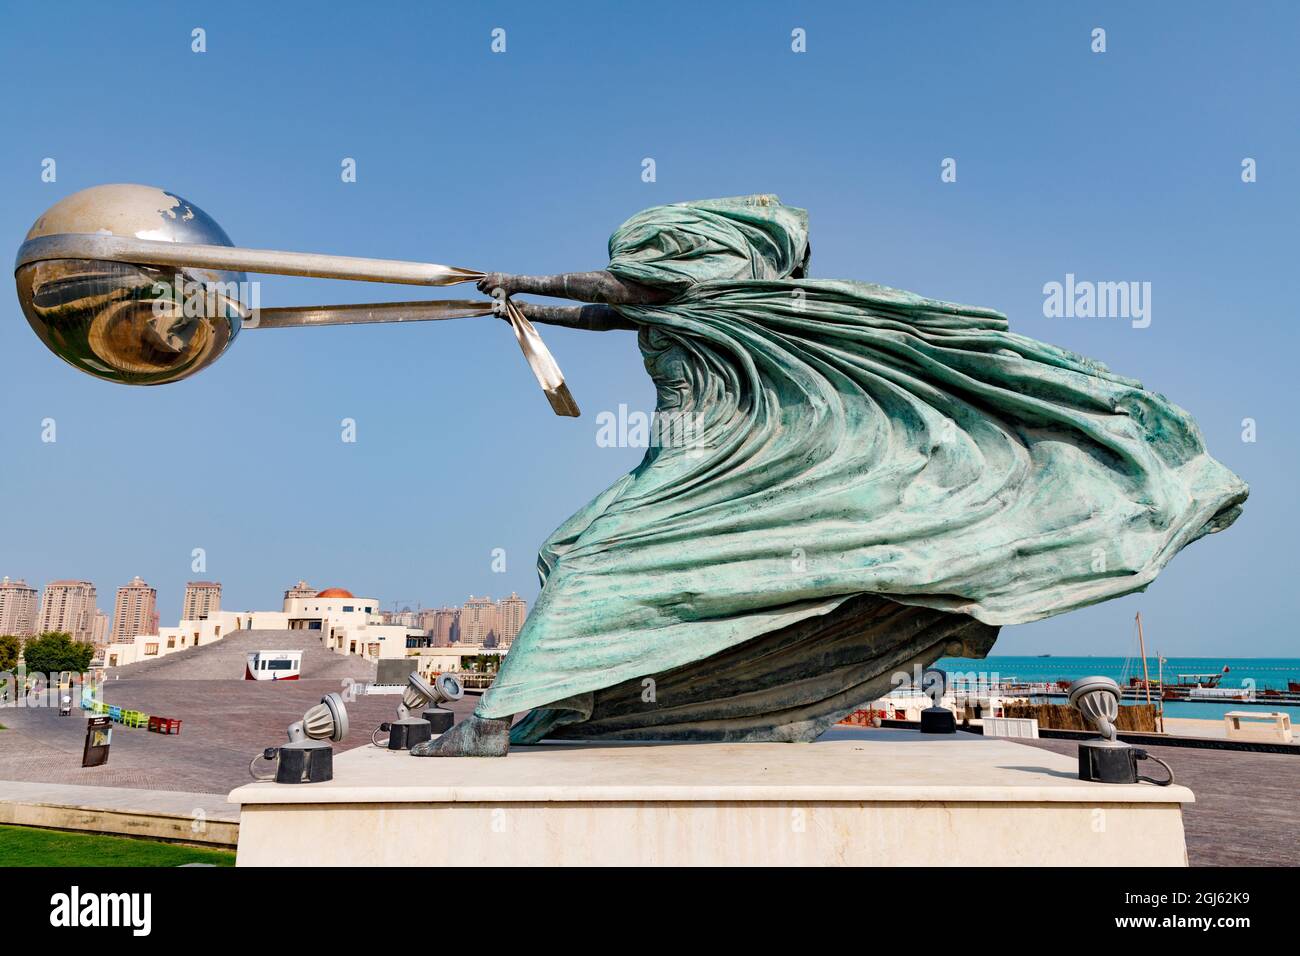 State of Qatar, Doha. Sculpture called 'Force of Nature' by Italian sculptor Lorenzo Quinn. (Editorial Use Only) Stock Photo